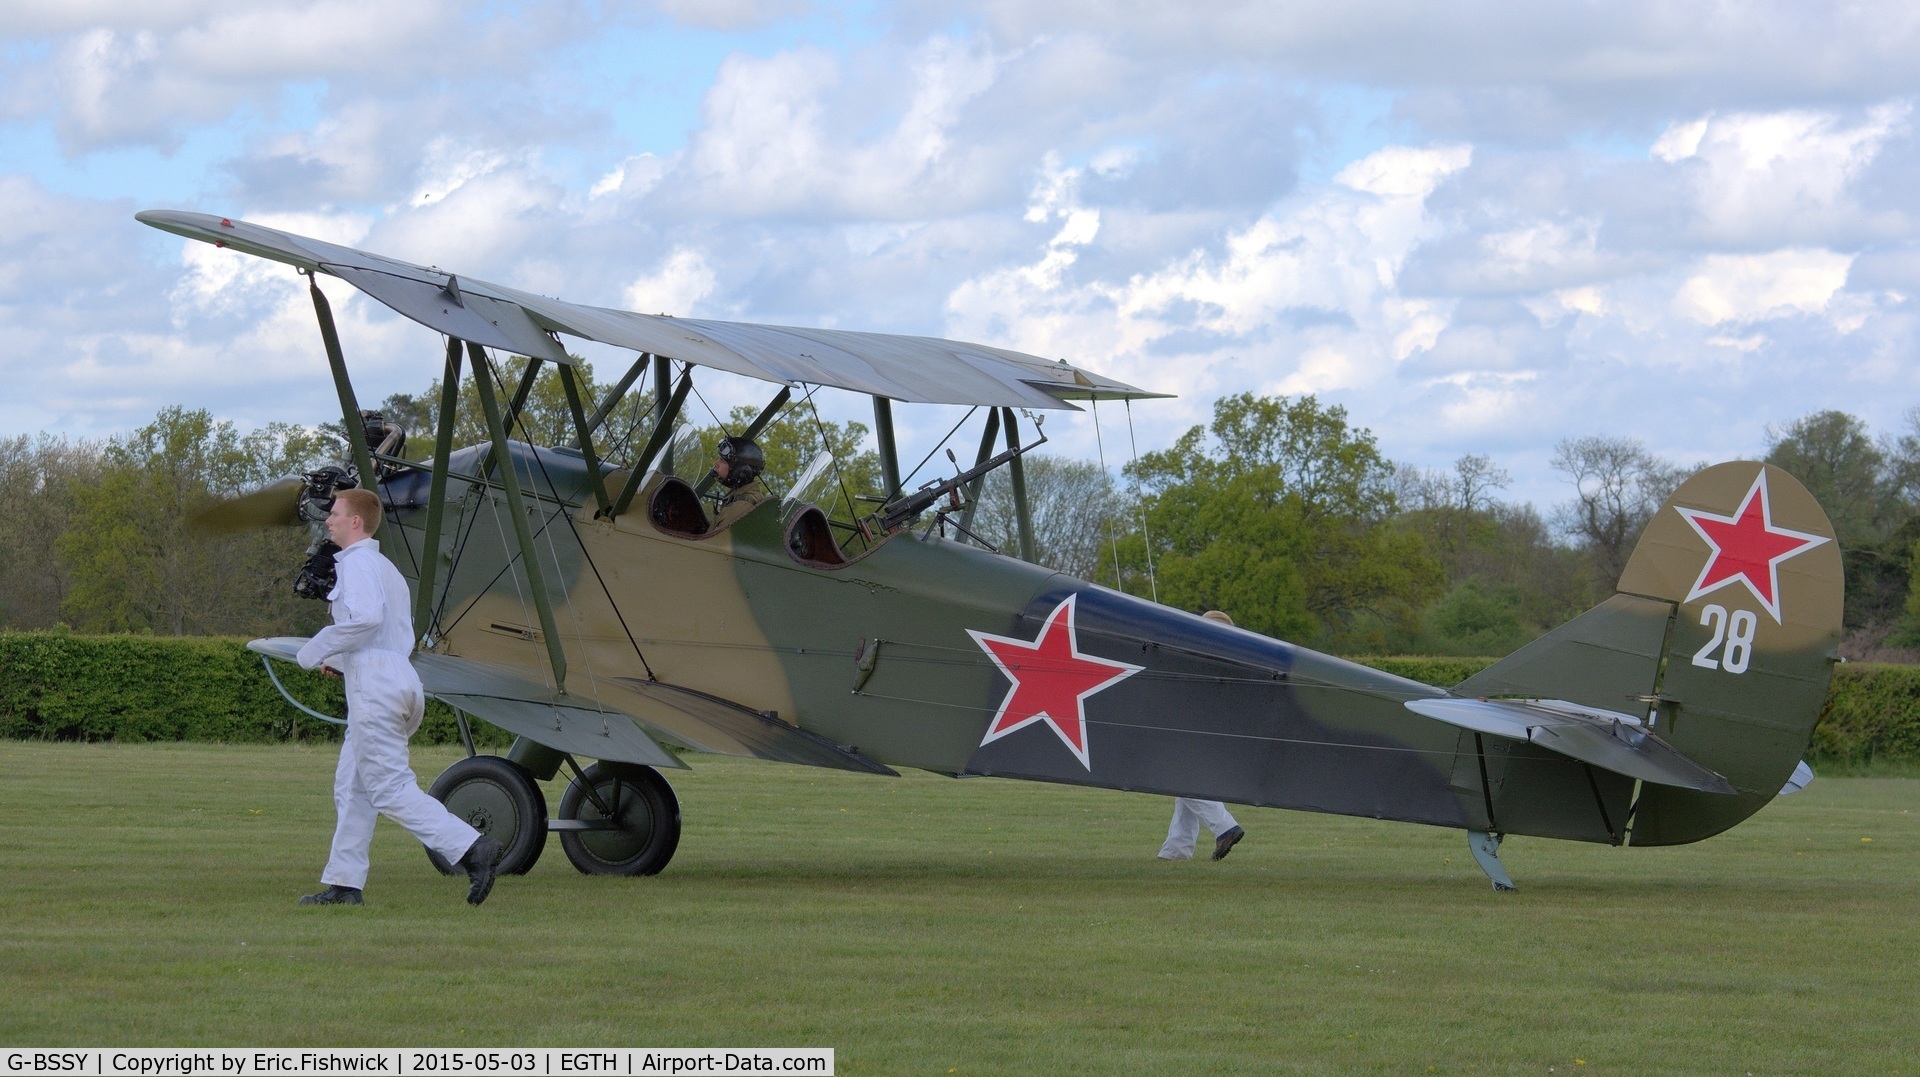 G-BSSY, 1944 Polikarpov Po-2 C/N 0094, 1. G-BSSY at the Shuttleworth VE Day Commemorative Airshow, May 2015